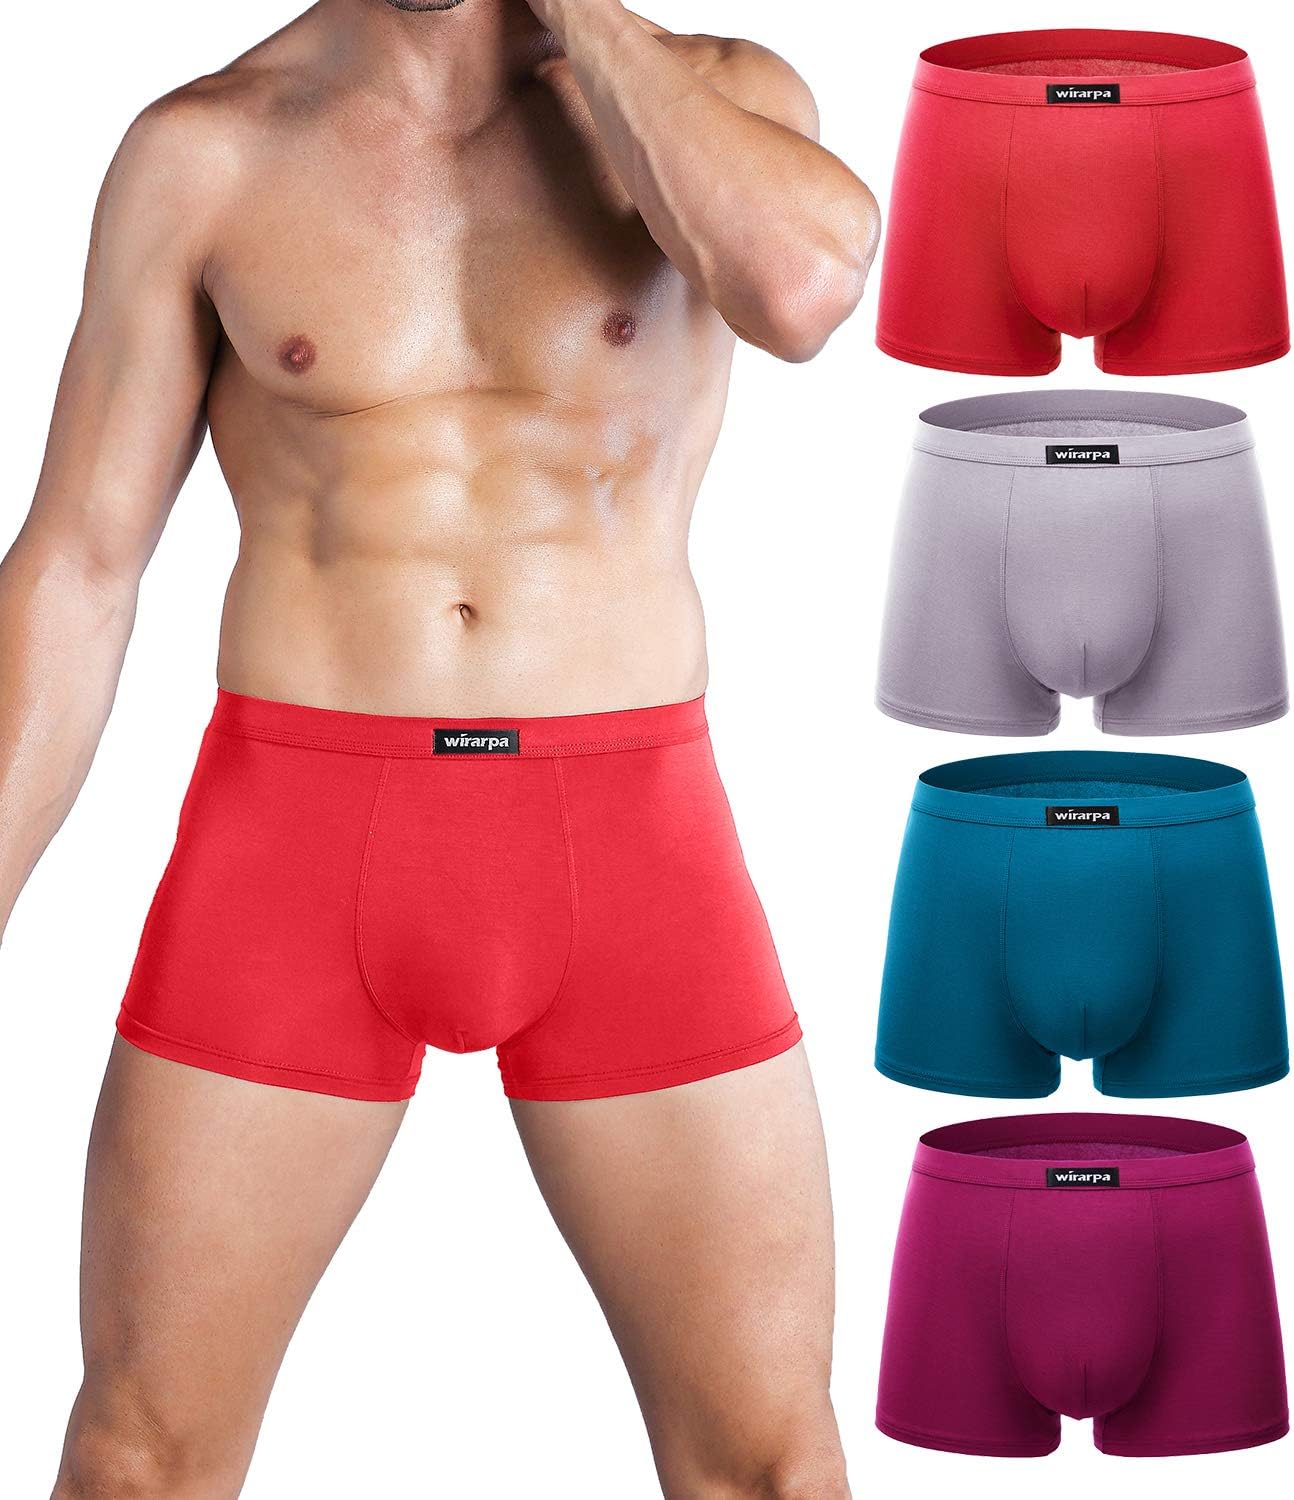 wirarpa Men's Breathable Modal Microfiber Trunks Underwear Covered Band  Multipac - Pioneer Recycling Services